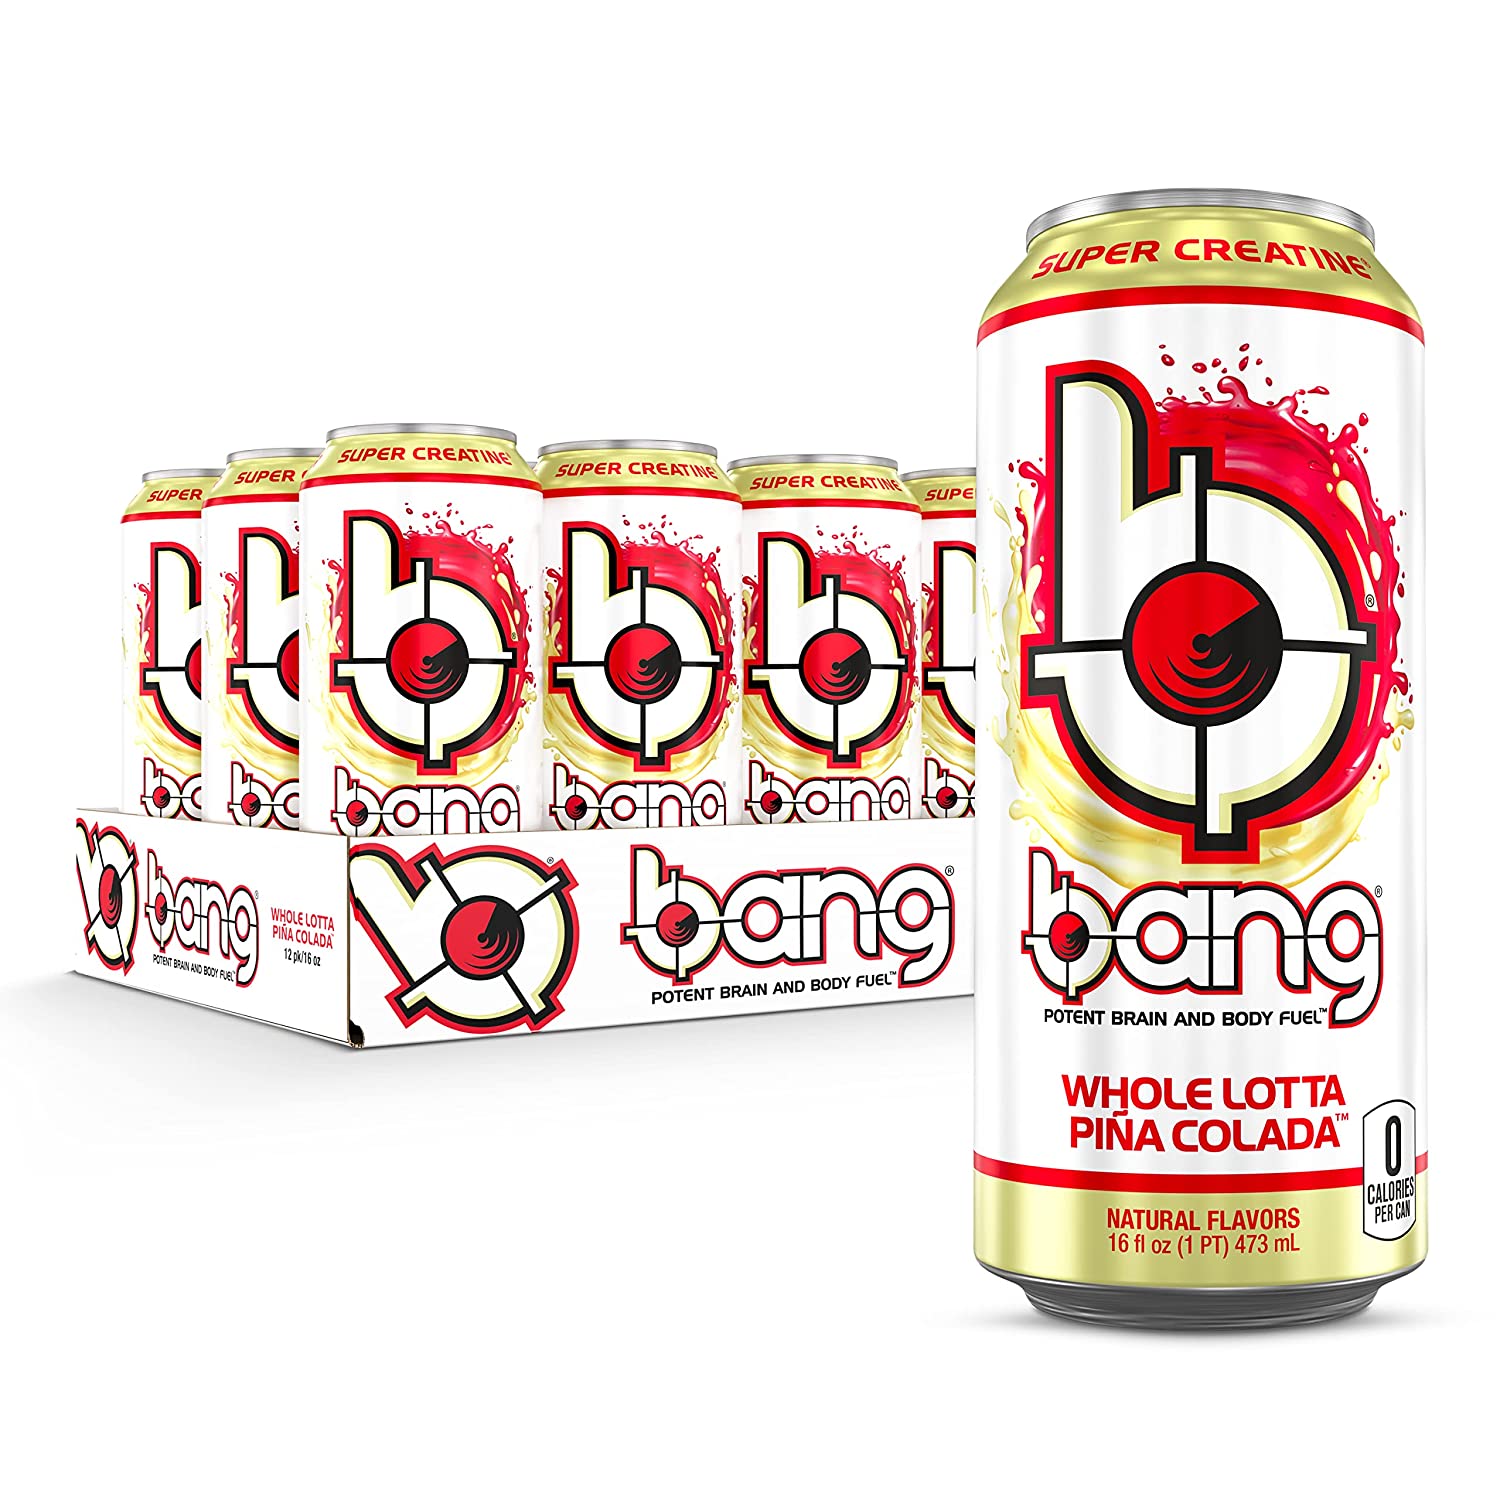 Bang Caffeine Nutrition Facts